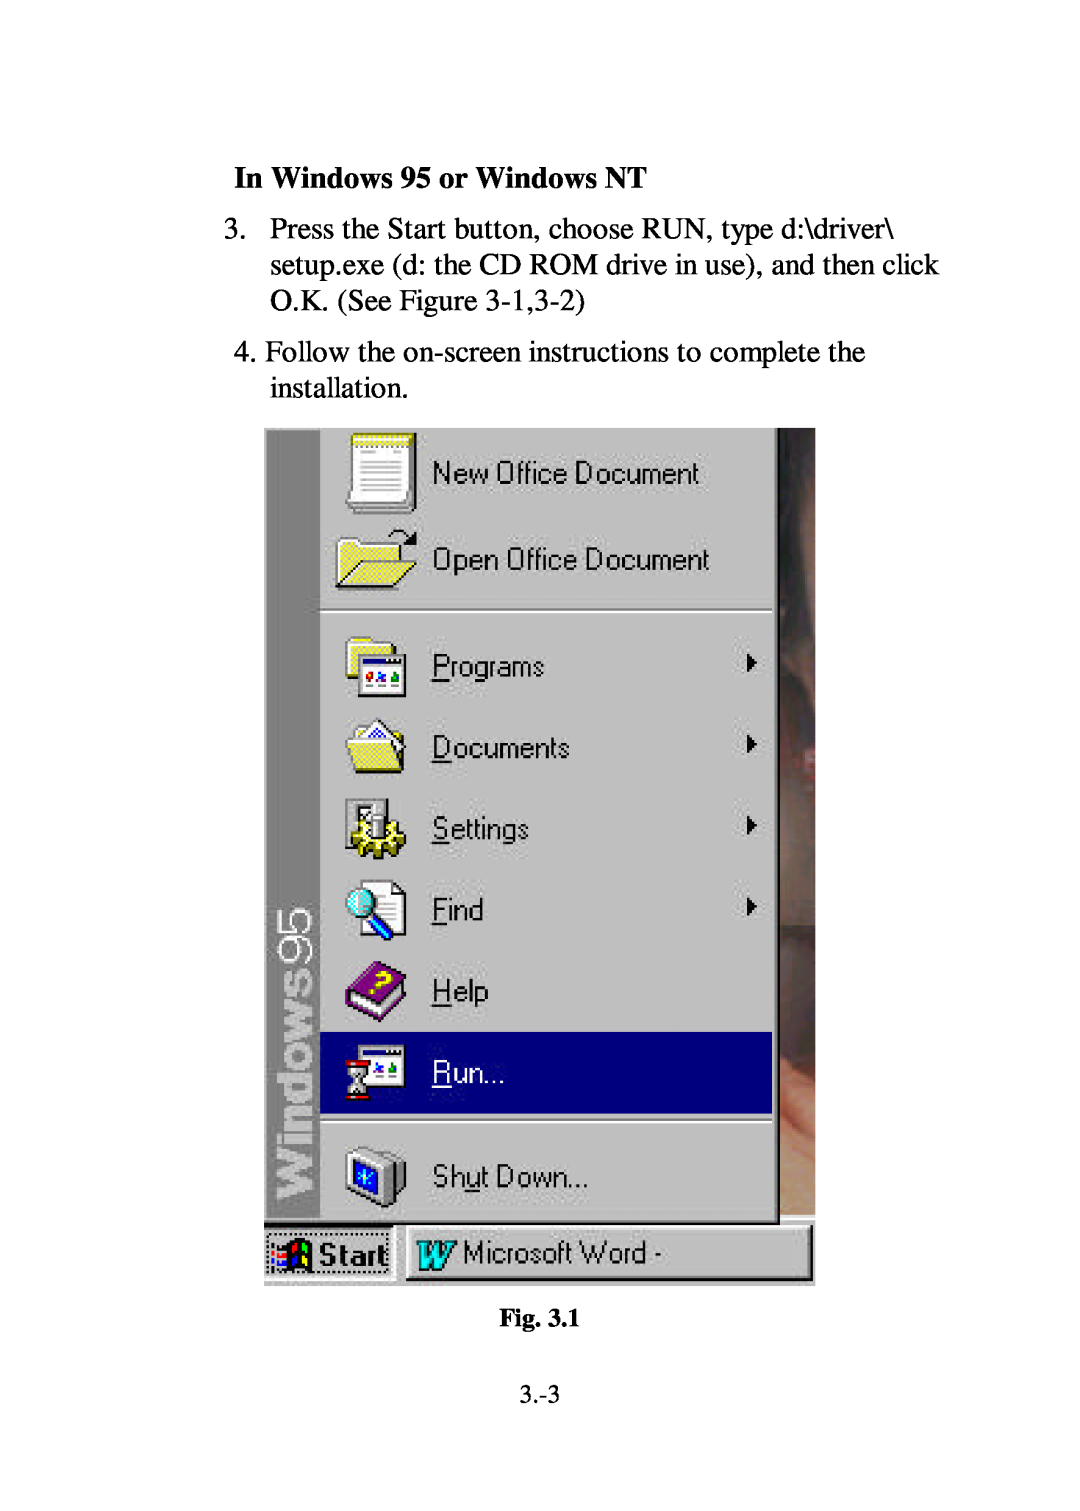 IBM Ricoh FB735 user manual In Windows 95 or Windows NT, Follow the on-screen instructions to complete the installation 